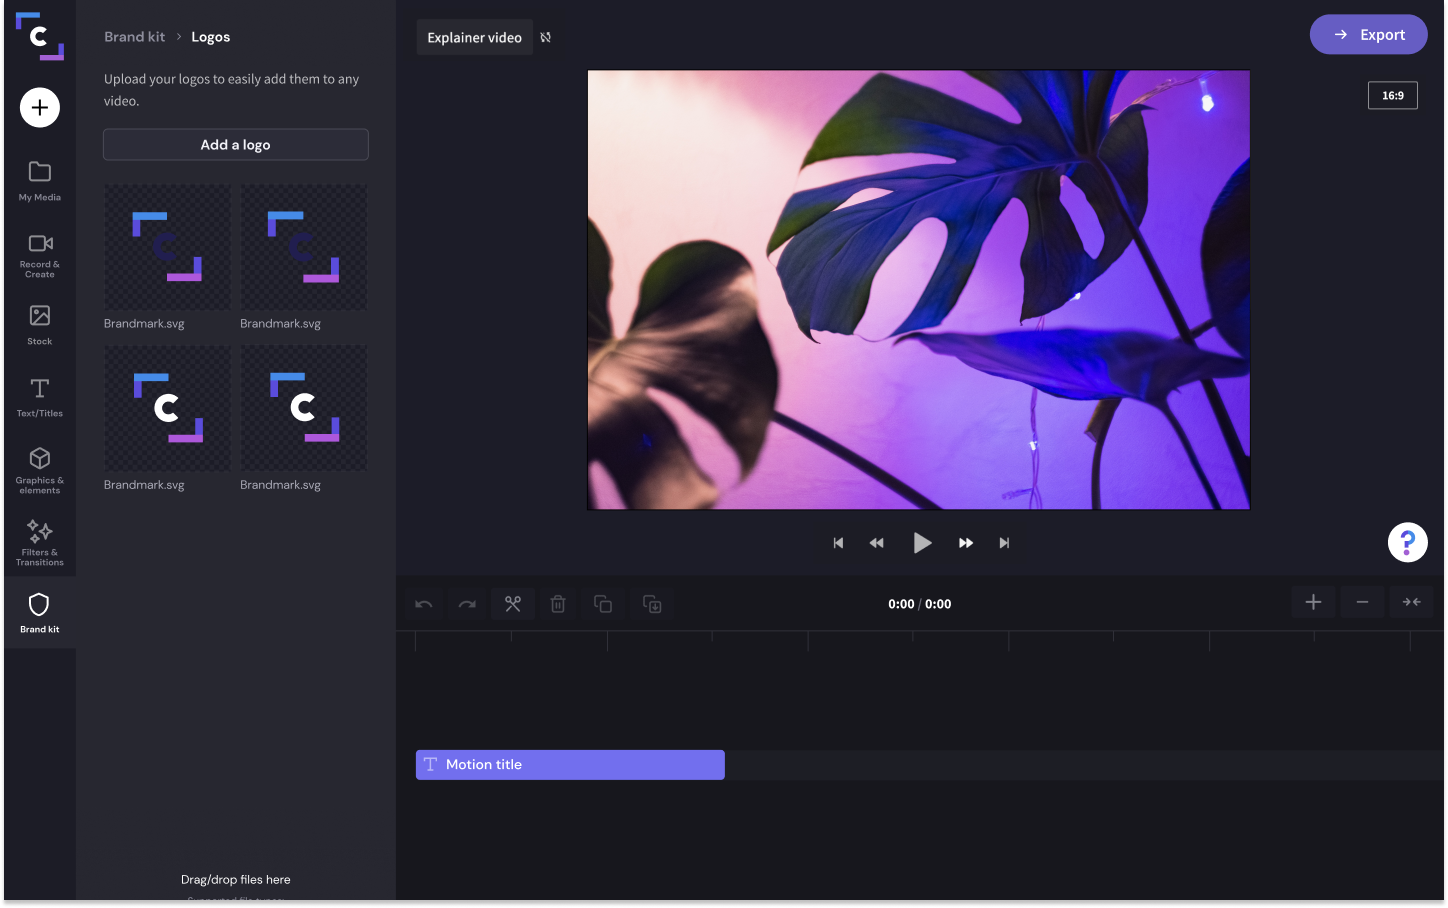 The logo selector in the brand kit tab is open in the Clipchamp video editor.